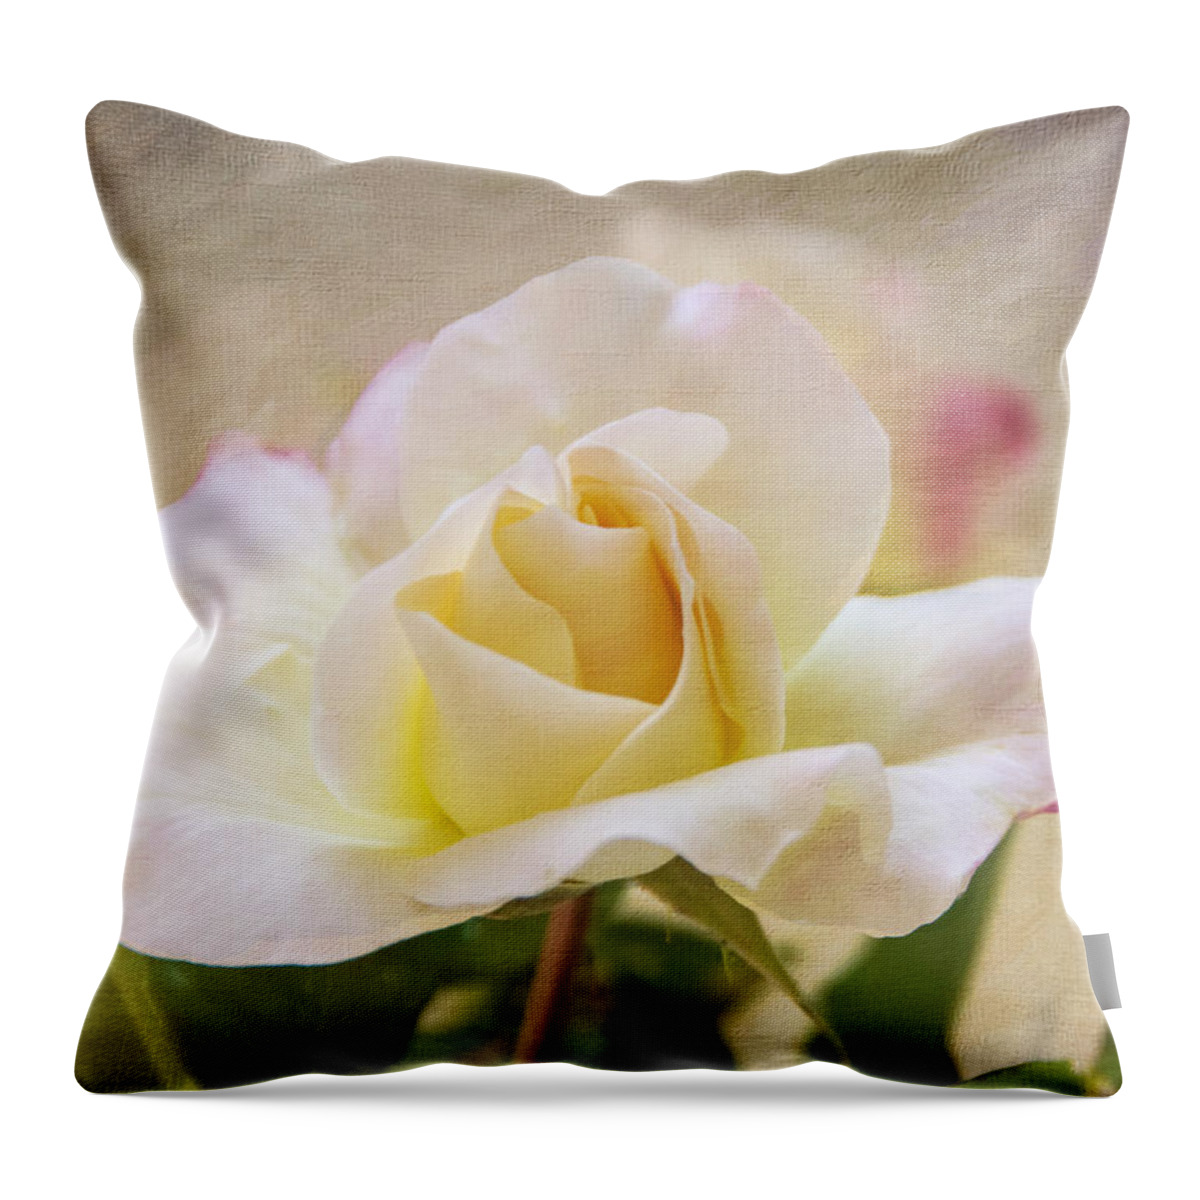 Rose Throw Pillow featuring the photograph Touch Of Pink by Cathy Kovarik